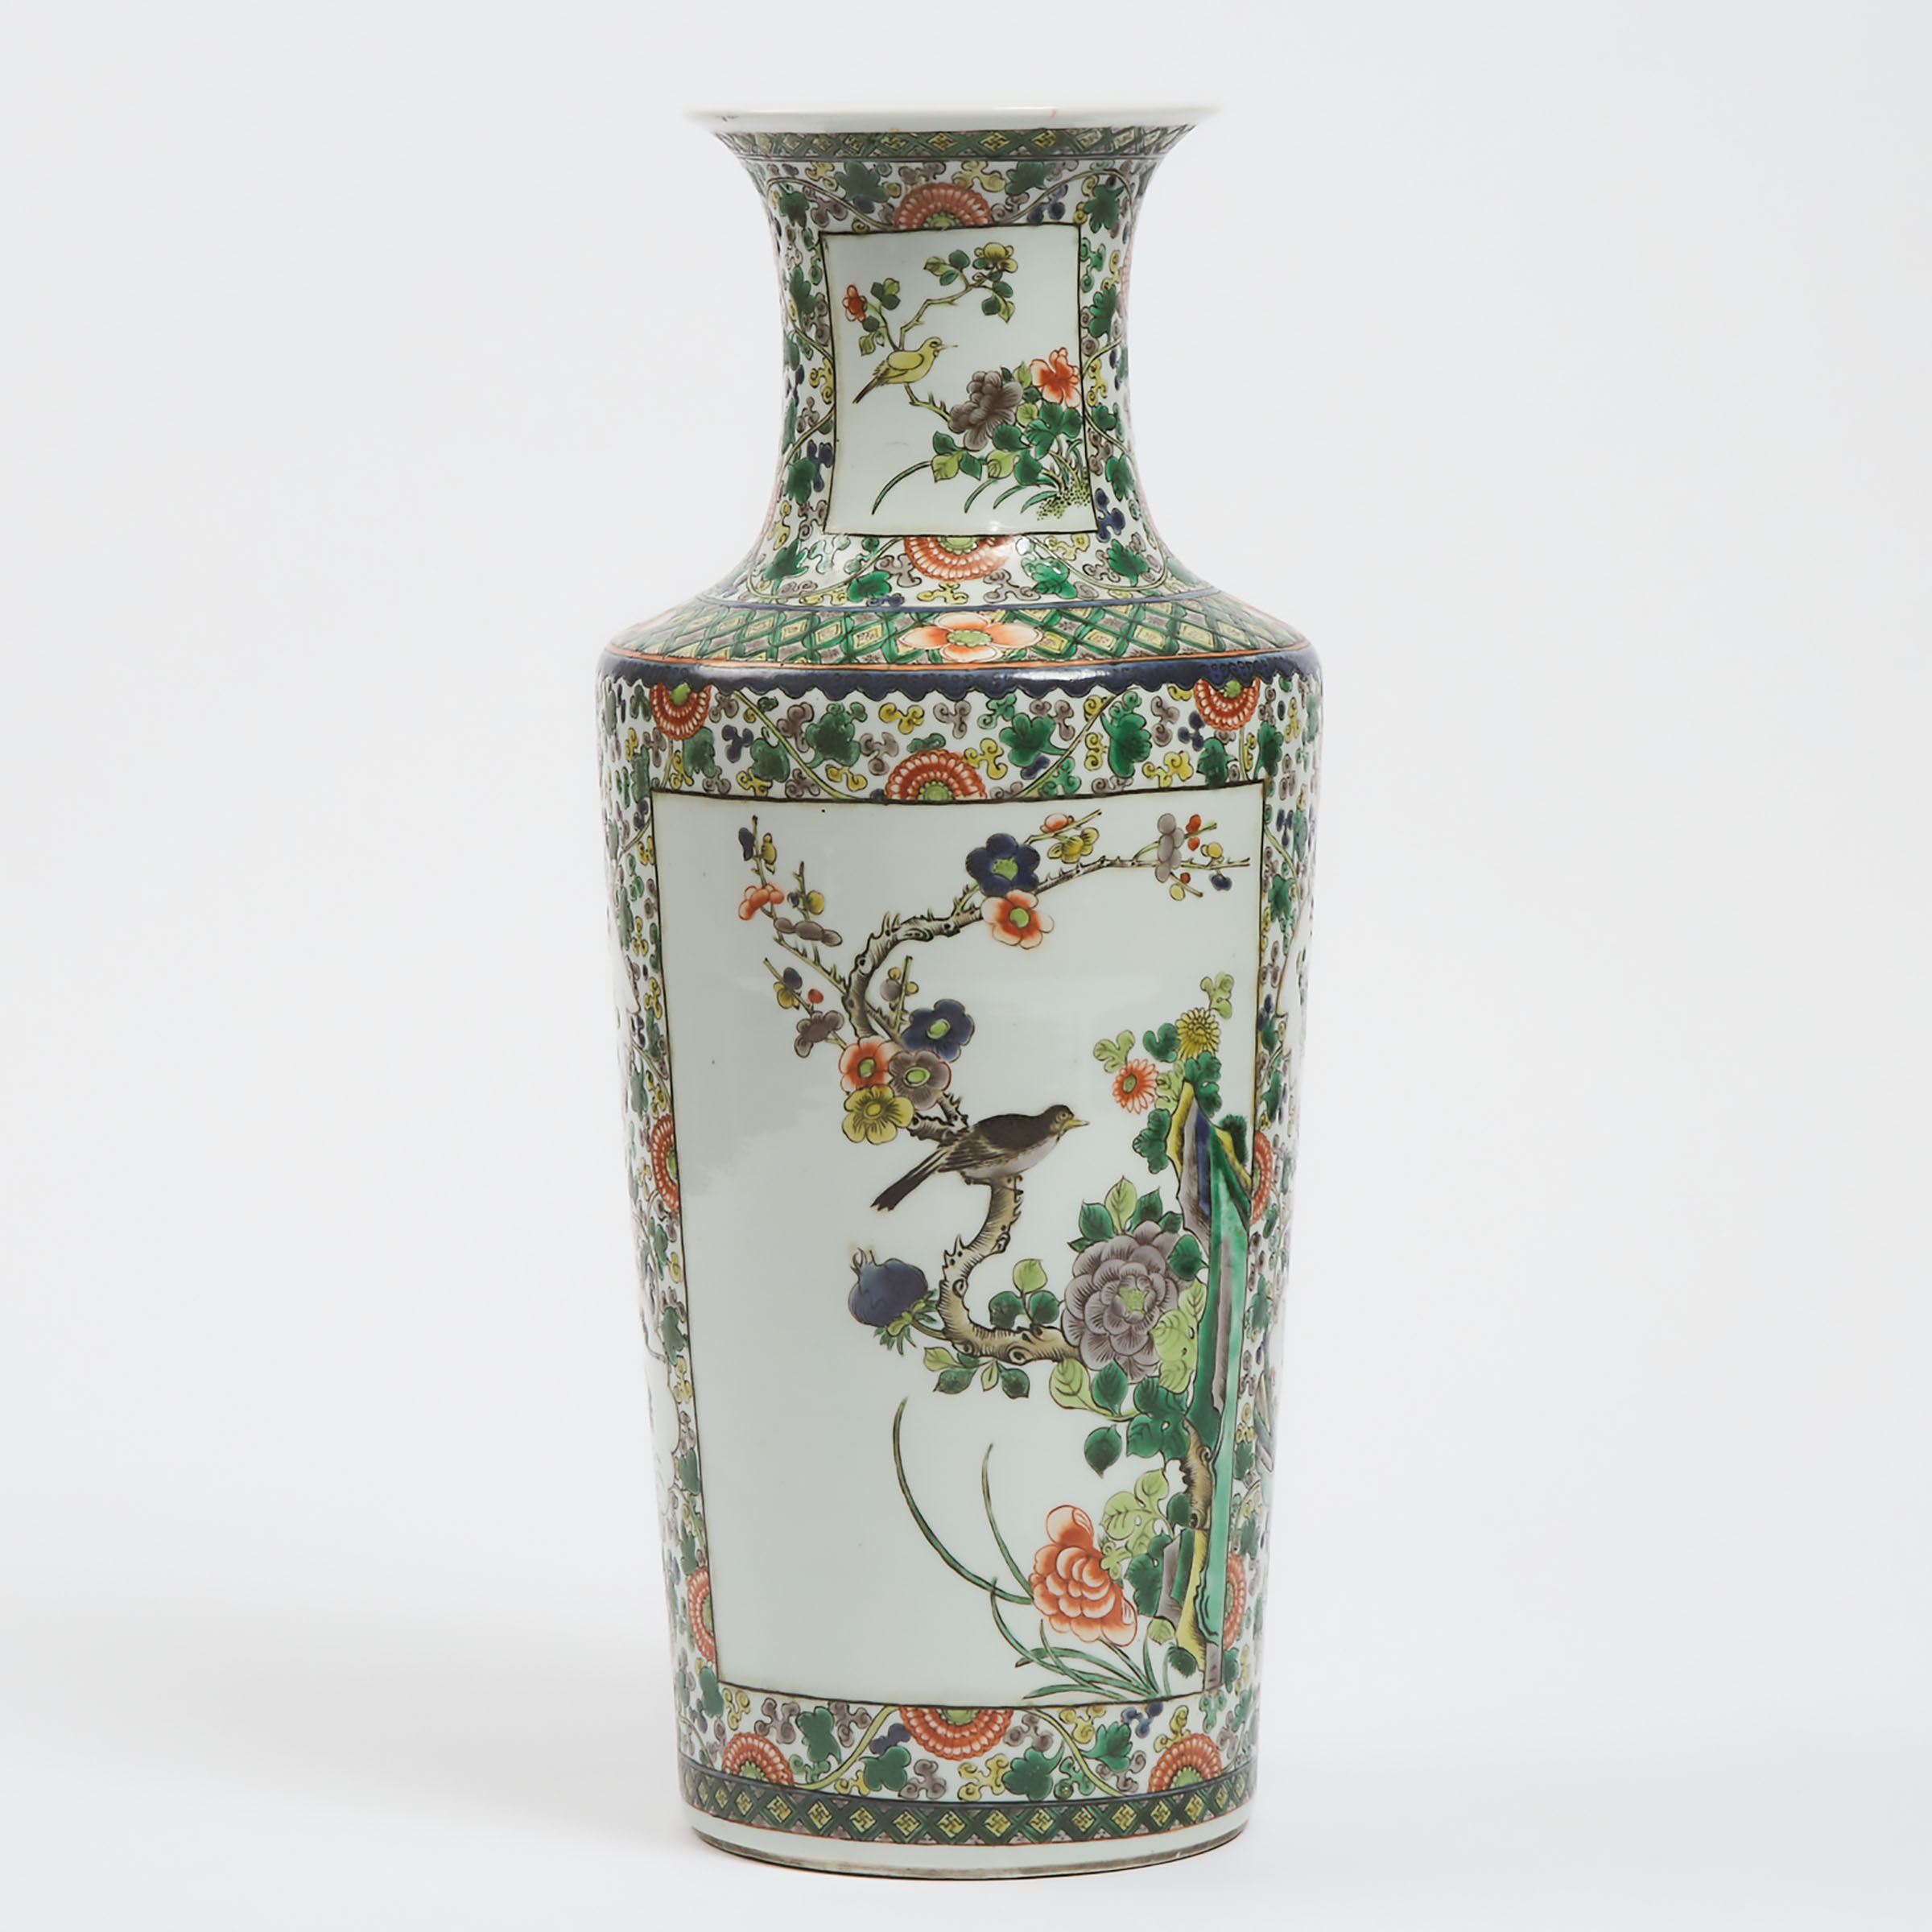 A Chinese Wucai 'Birds and Flowers' Rouleau Vase, 19th Century